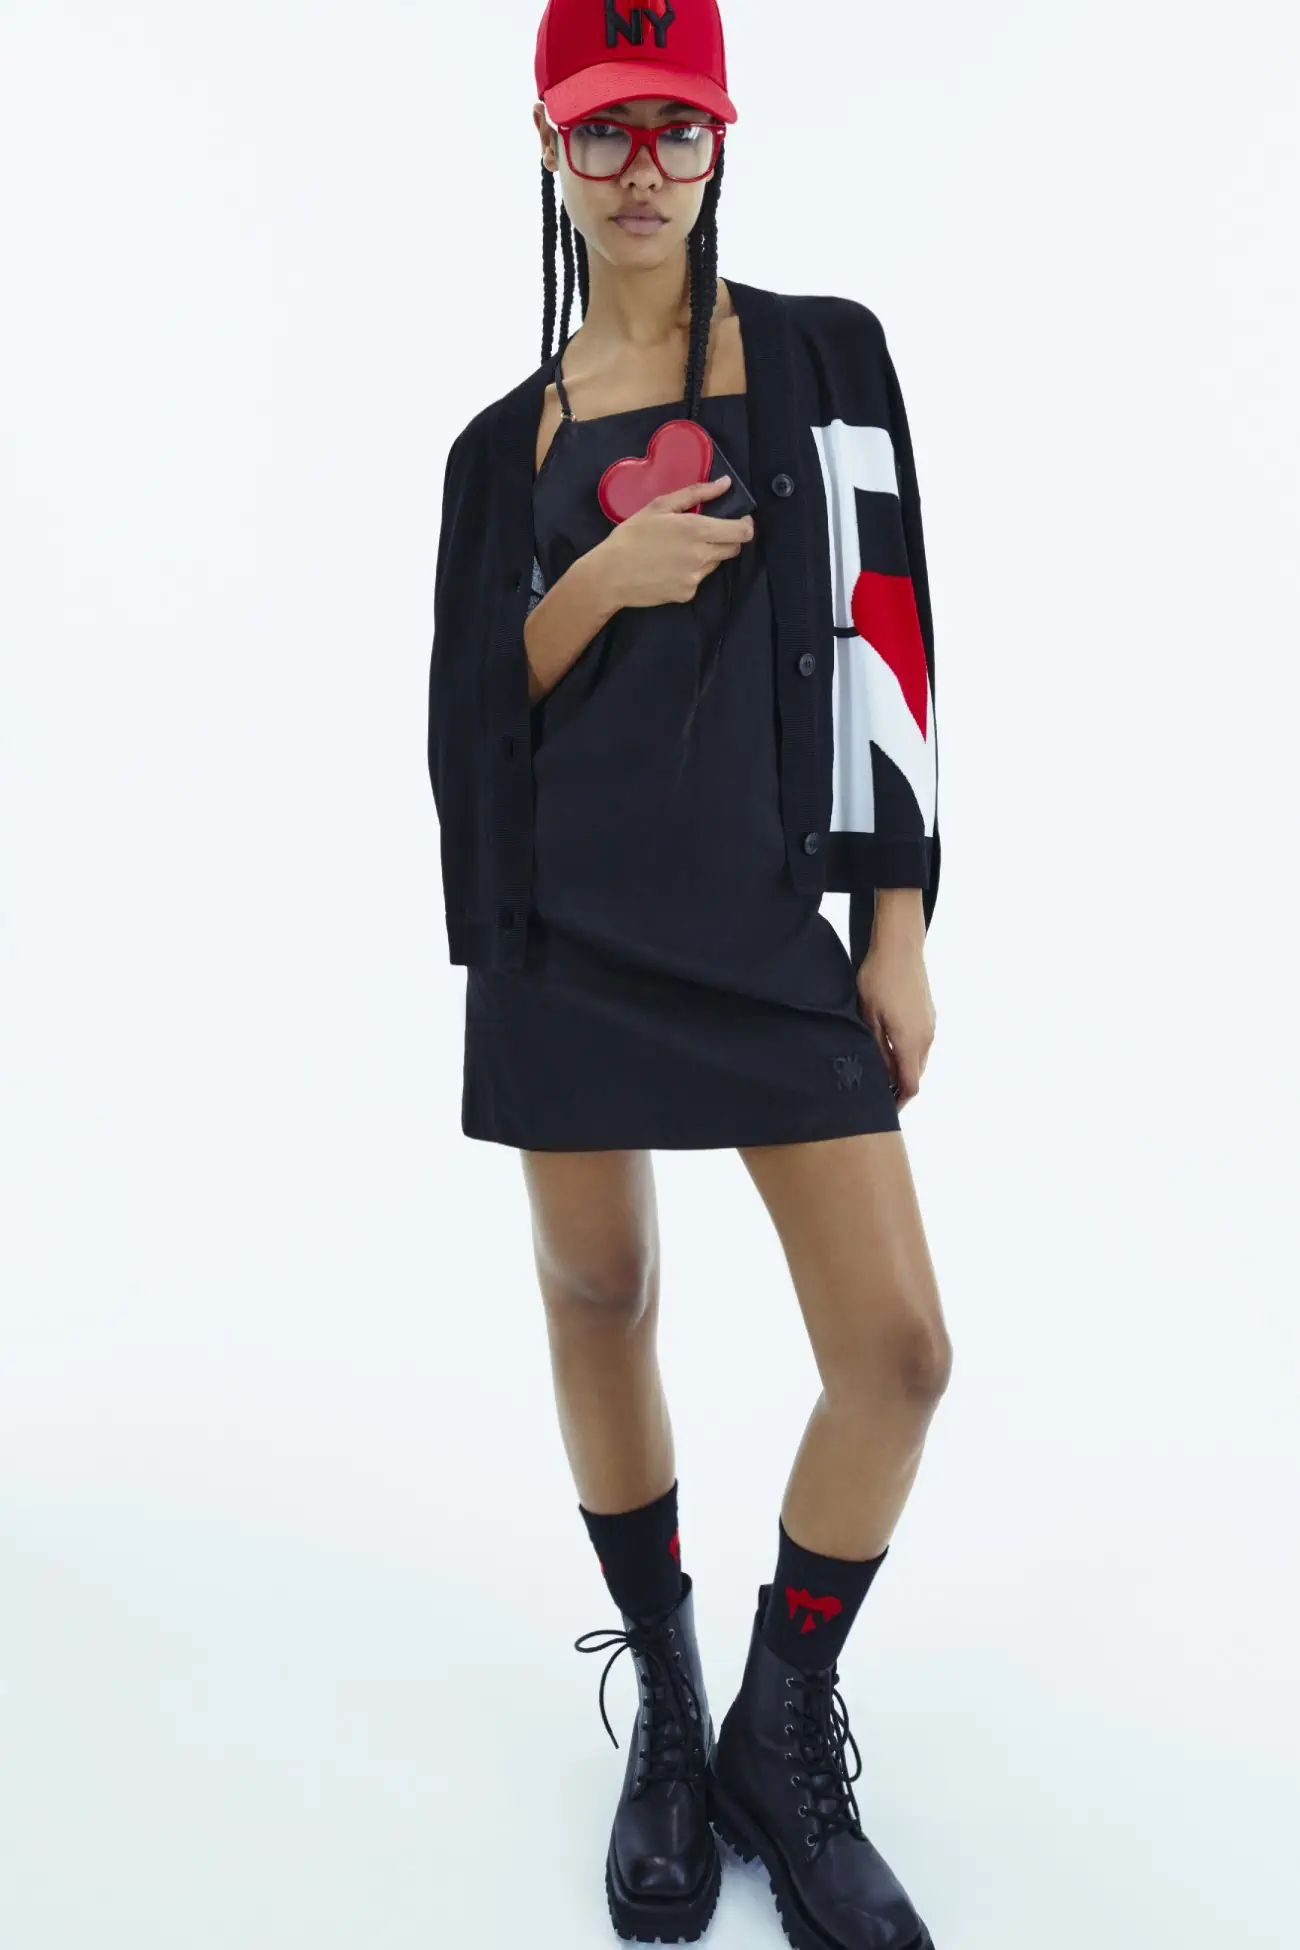 DKNY reimagines iconic logo through ''The Heart of NY Capsule''